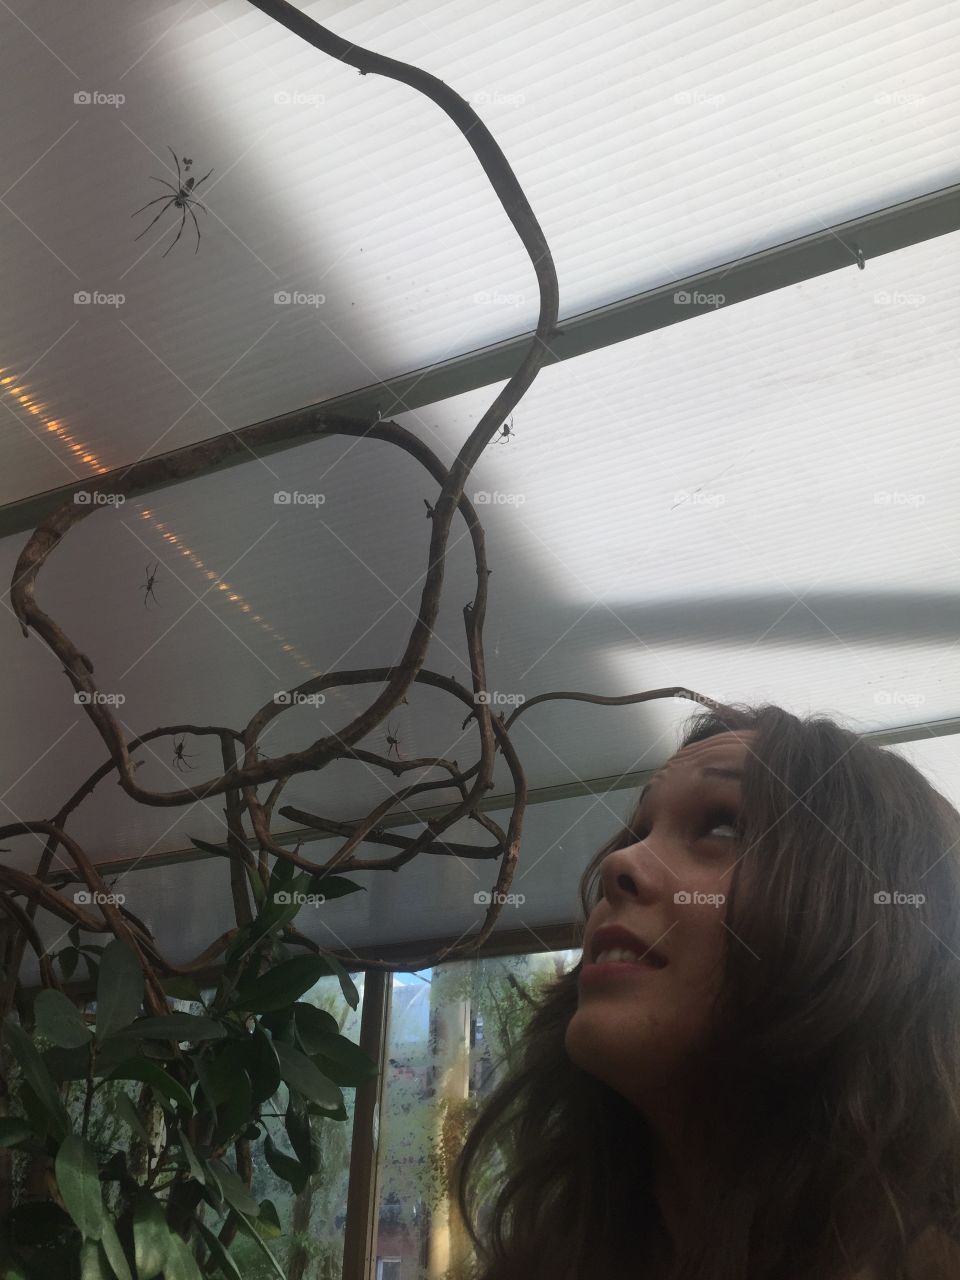 Spider sanctuary. London zoo, fear of spiders, facing my fear. Extremely scared